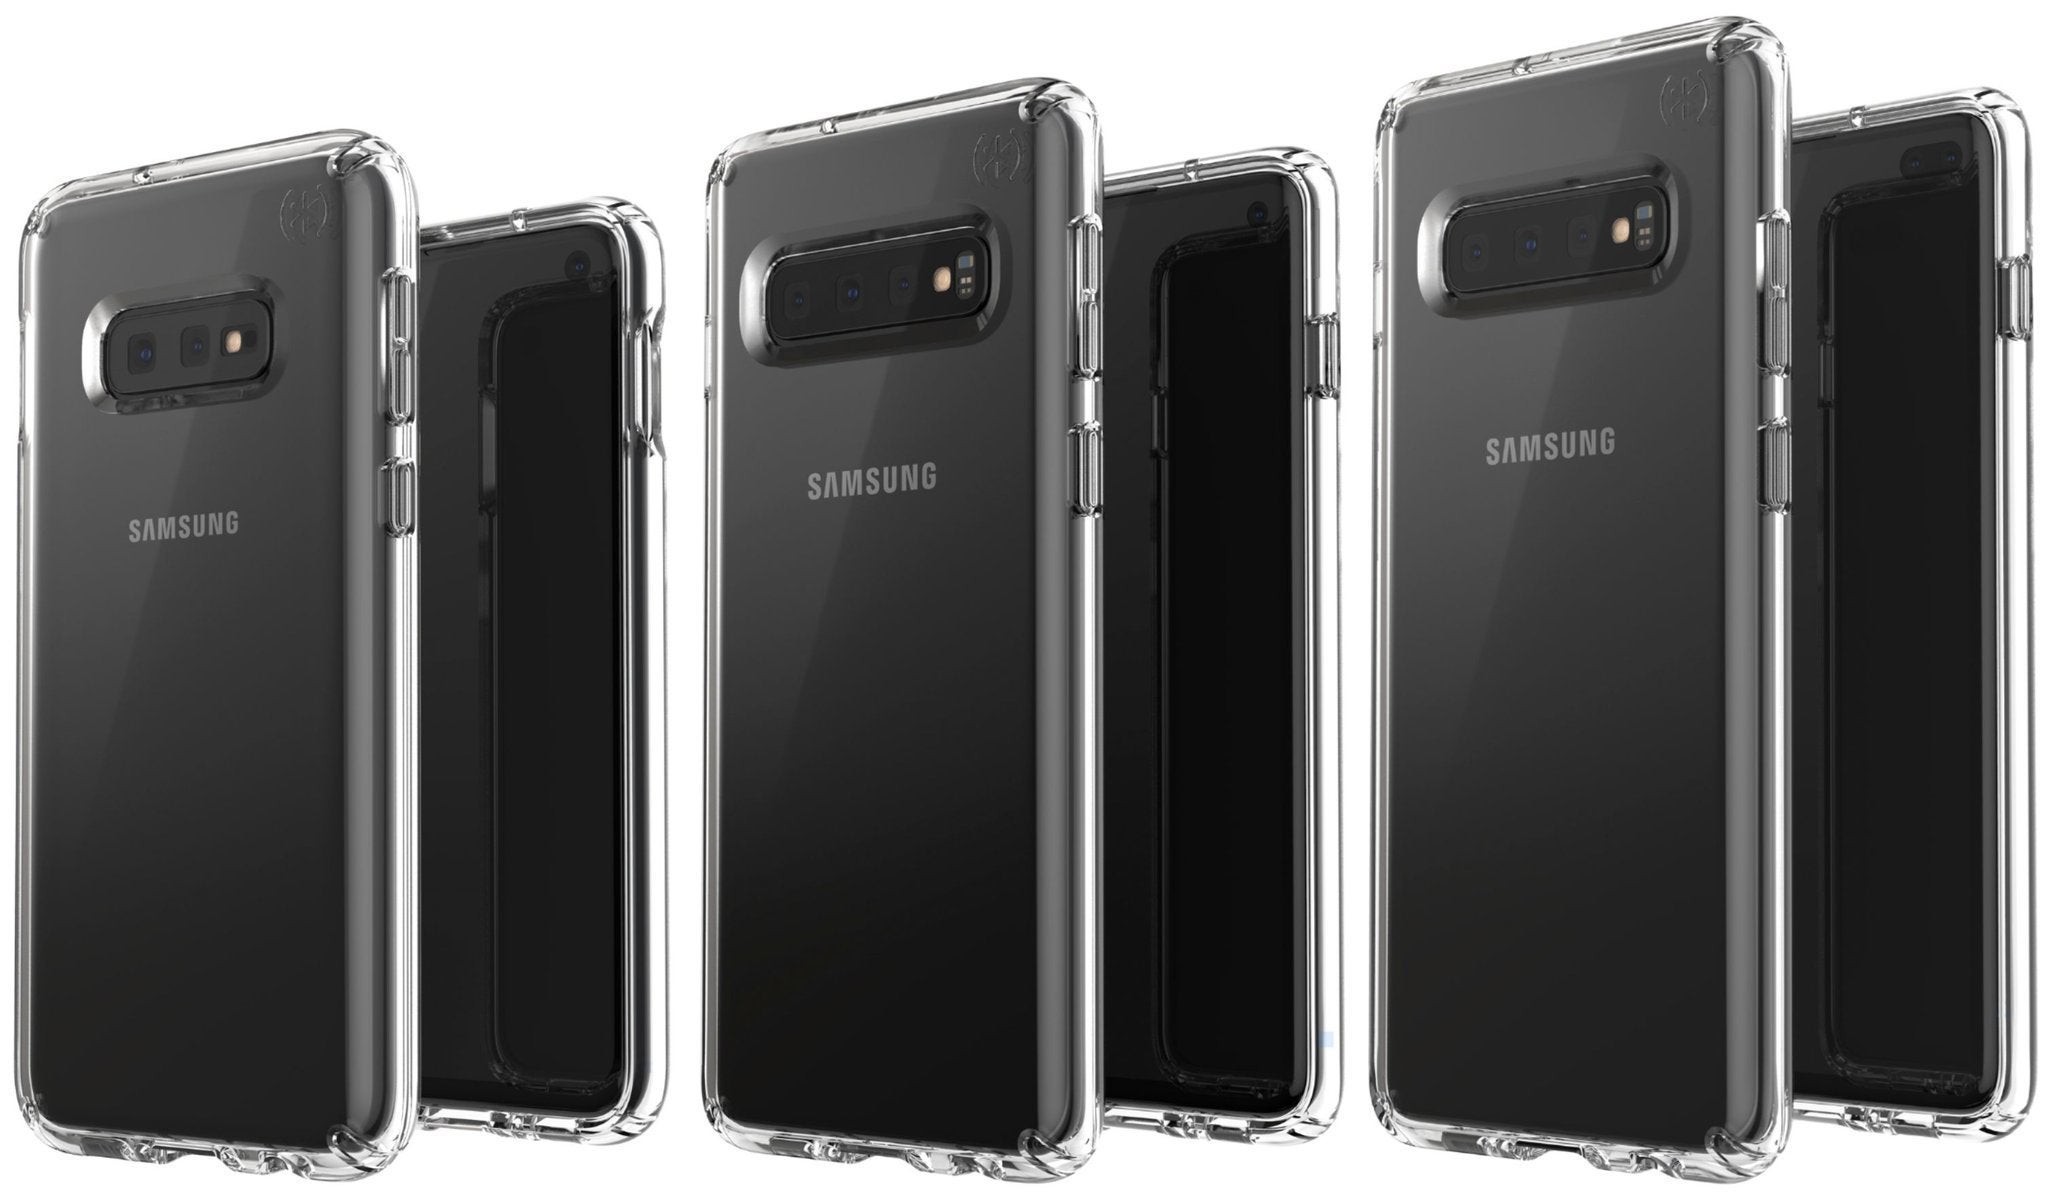 Samsung Galaxy S10 line - Samsung Galaxy S10 lineup will be launched in early March